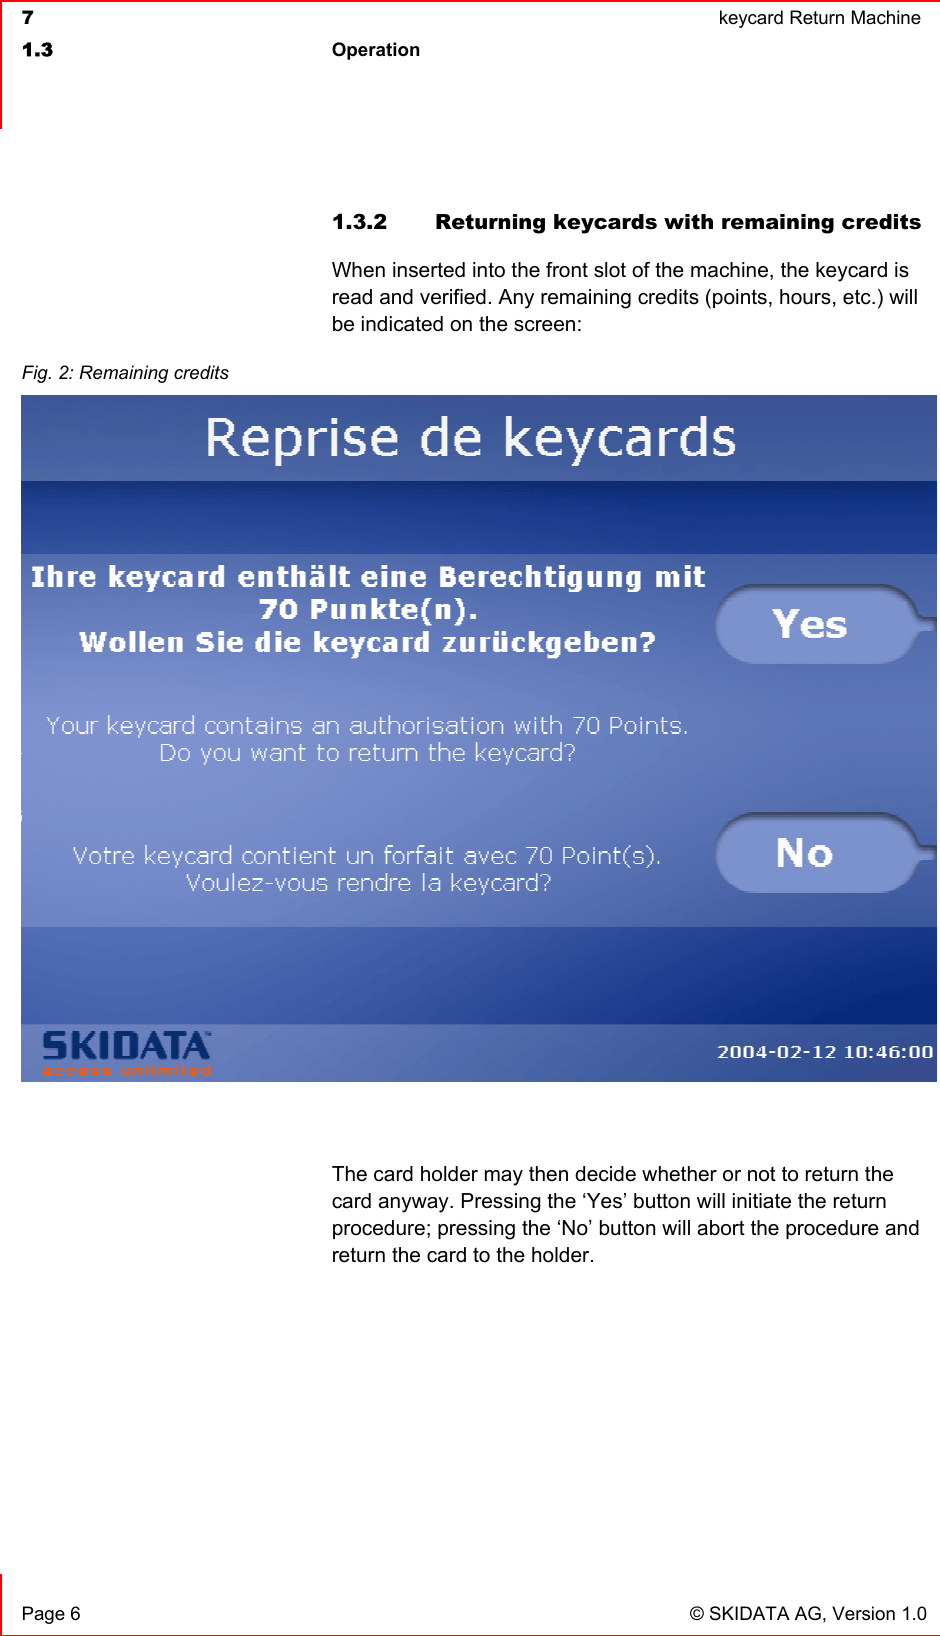  7  keycard Return Machine1.3 Operation Page 6  © SKIDATA AG, Version 1.0 1.3.2  Returning keycards with remaining credits When inserted into the front slot of the machine, the keycard is read and verified. Any remaining credits (points, hours, etc.) will be indicated on the screen: The card holder may then decide whether or not to return the card anyway. Pressing the ‘Yes’ button will initiate the return procedure; pressing the ‘No’ button will abort the procedure and return the card to the holder. Fig. 2: Remaining credits 